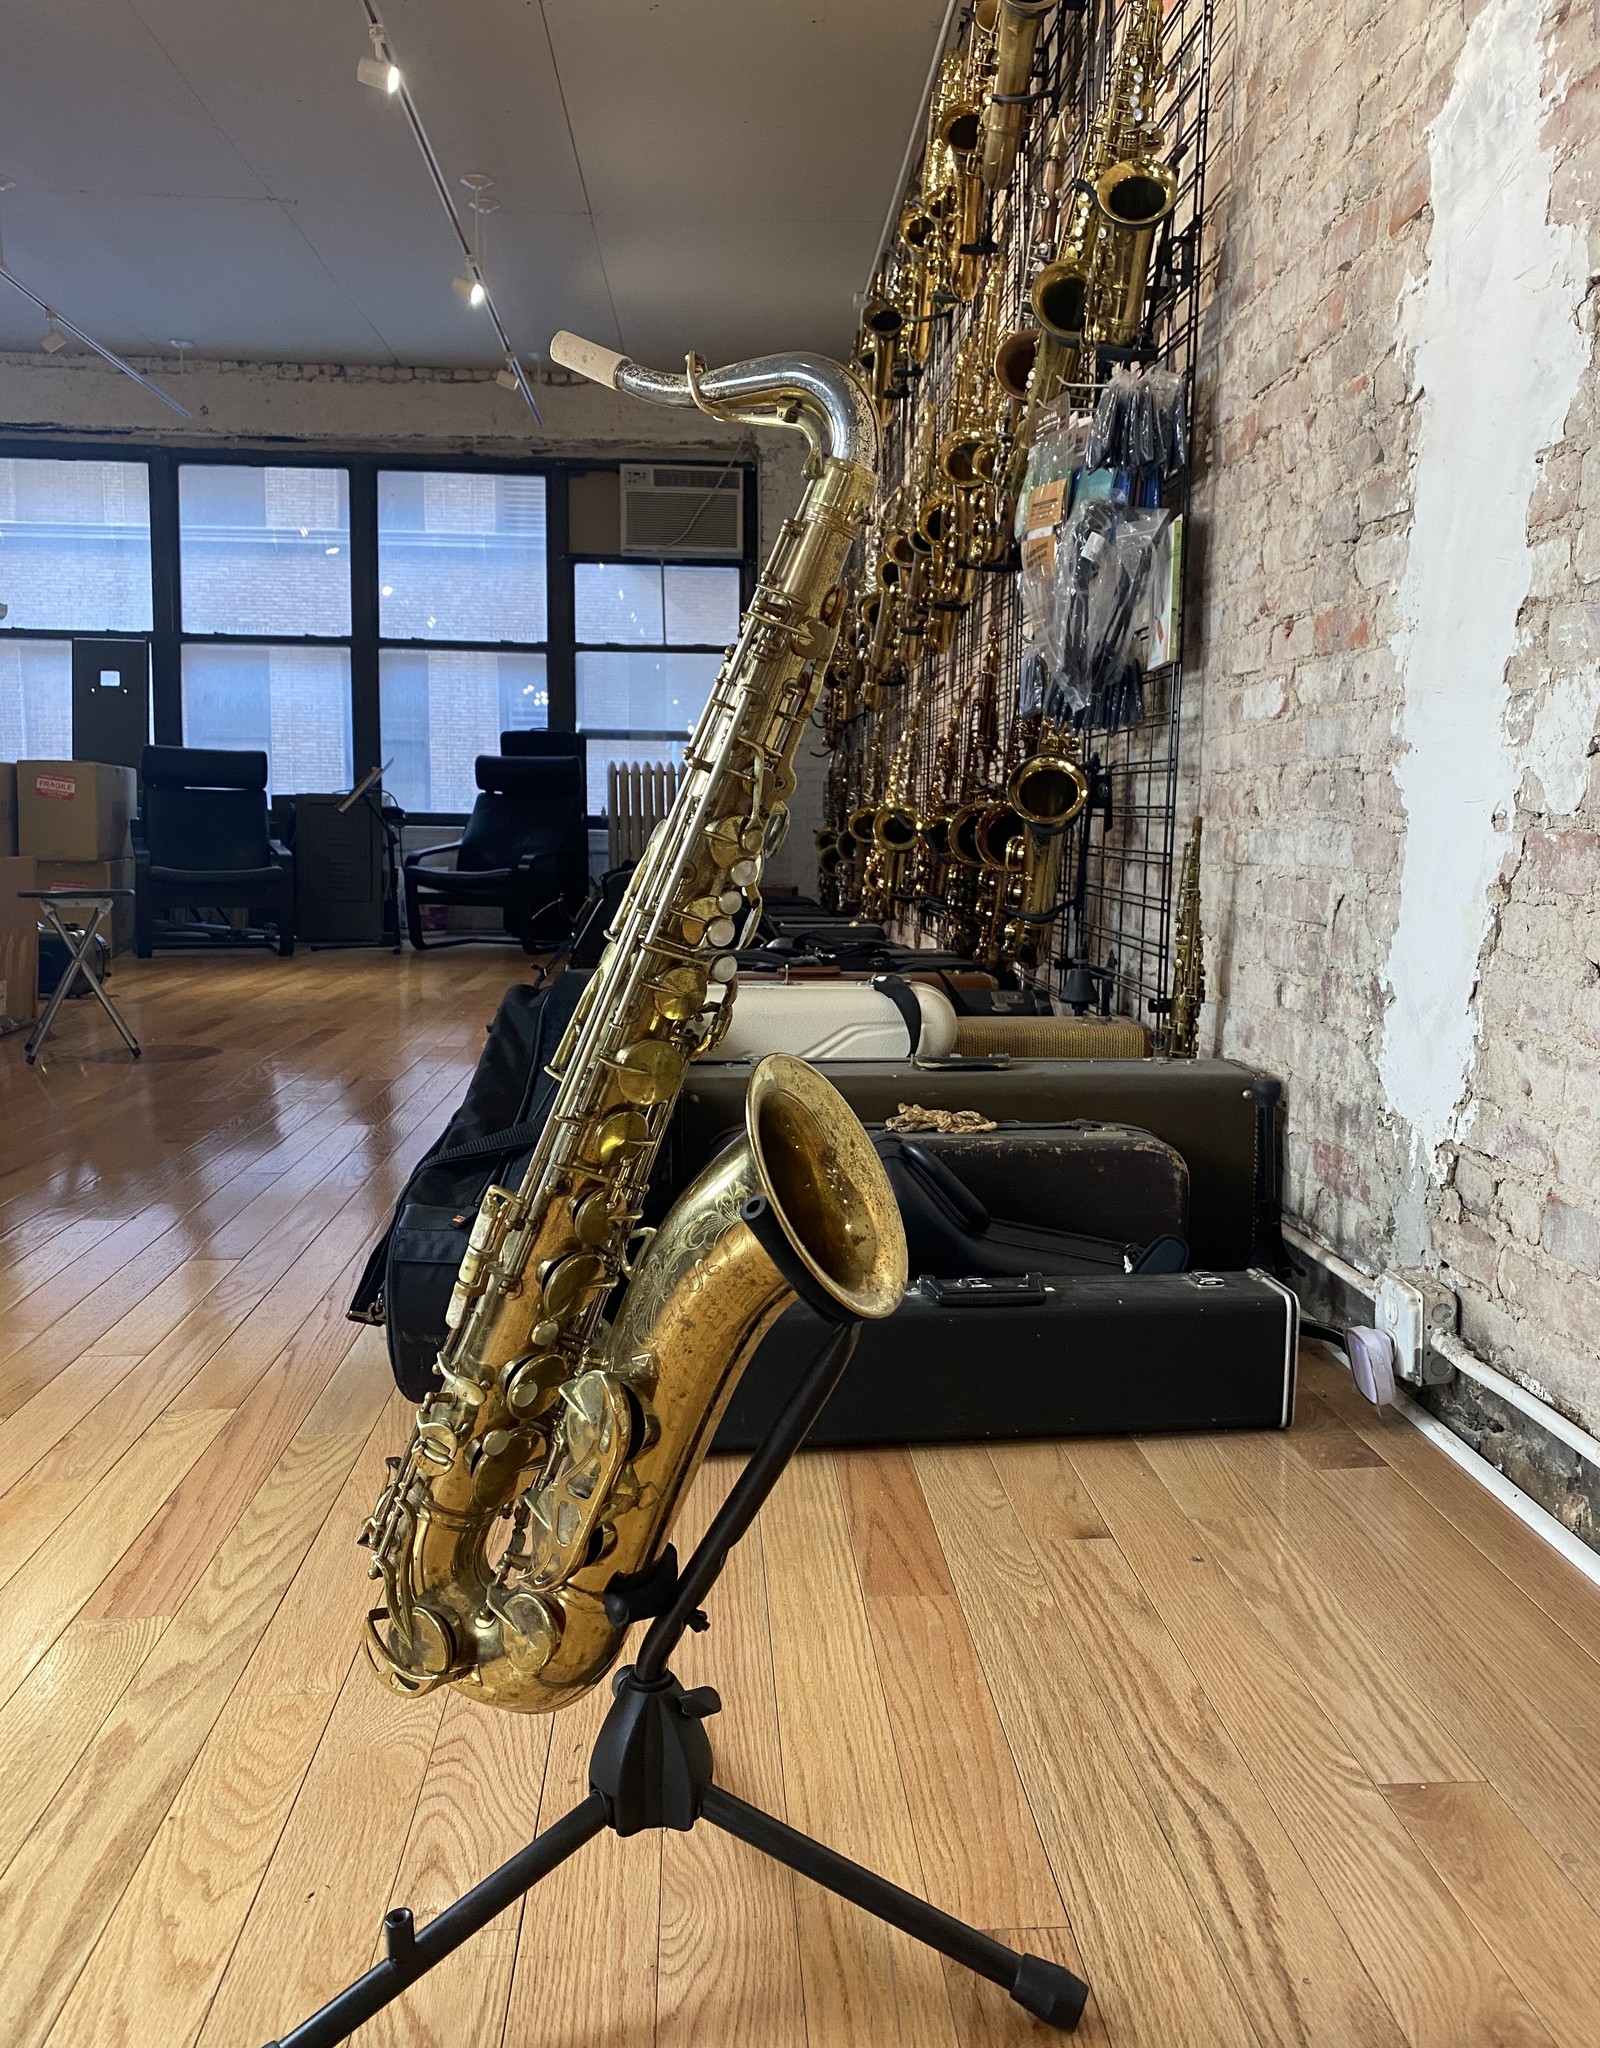 King 1947 King Super 20 Tenor Saxophone Full Pearl Cleveland with Solid Silver Neck 292XXX